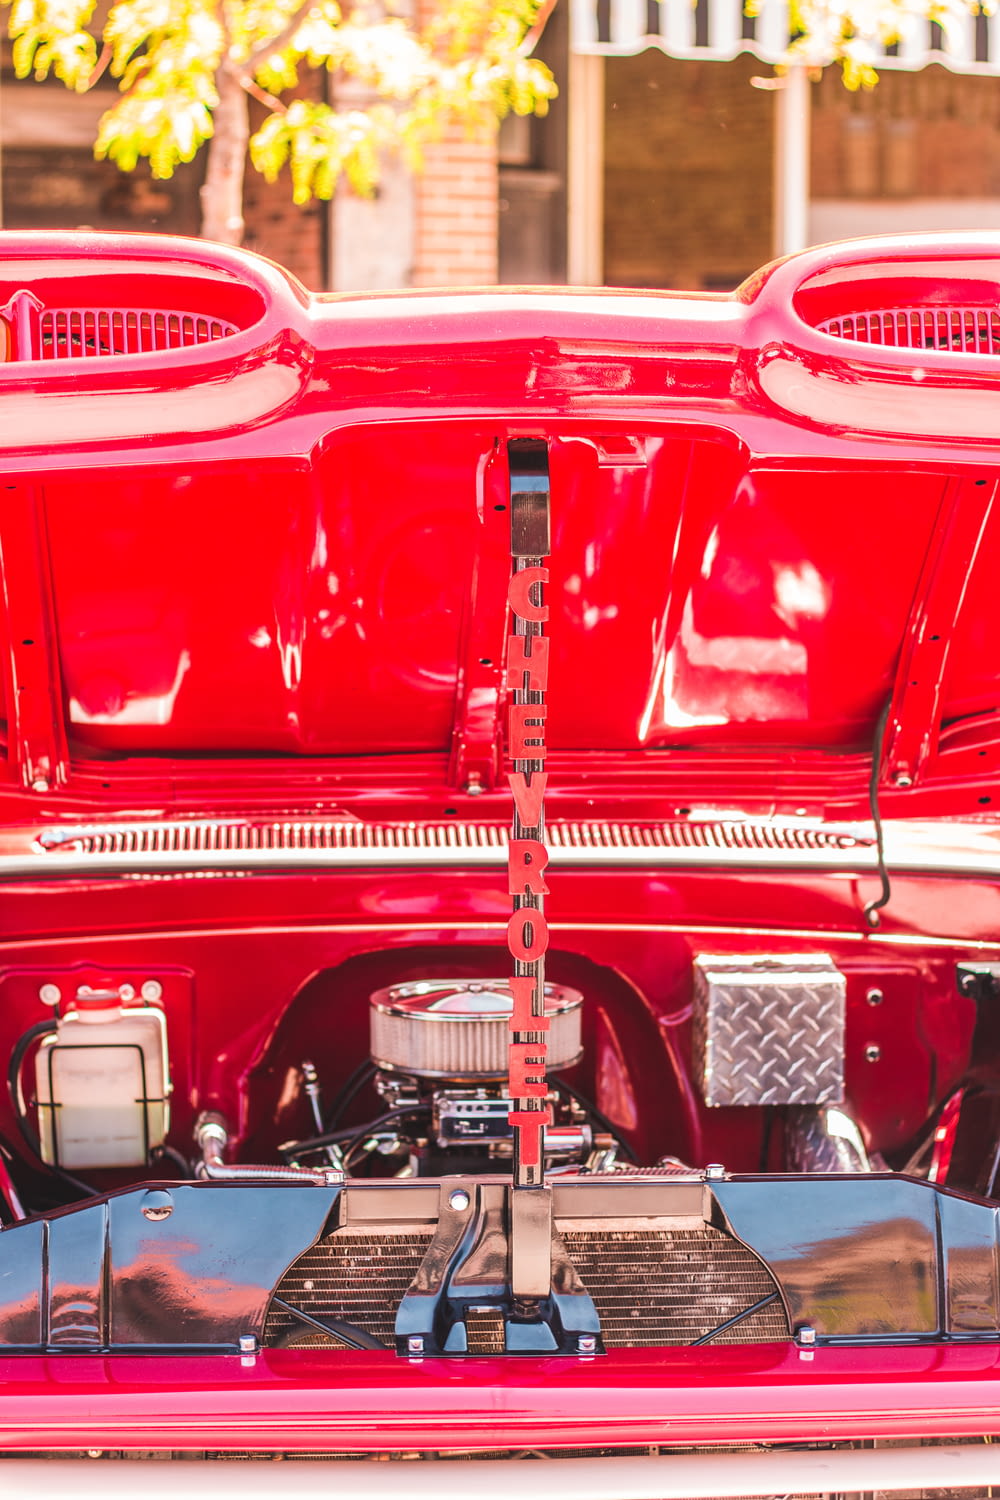 a close up of the rear end of a red car